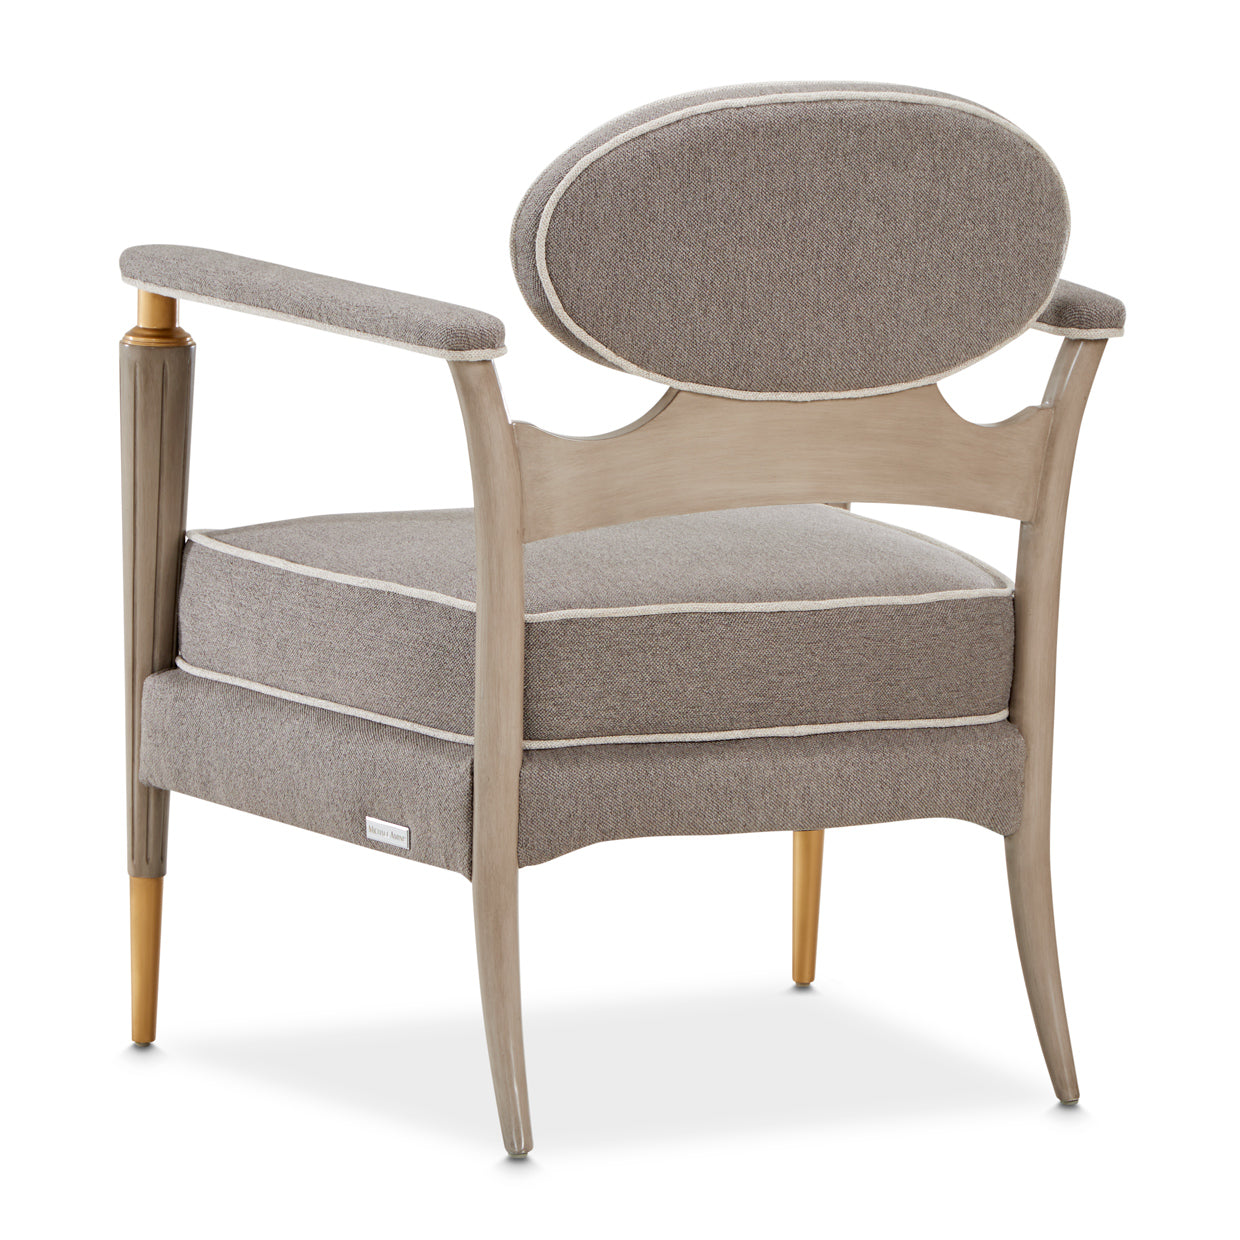 Accent Chair,St.Charles,comfortable seating,Dove Gray finish,slender legs,classic shape,